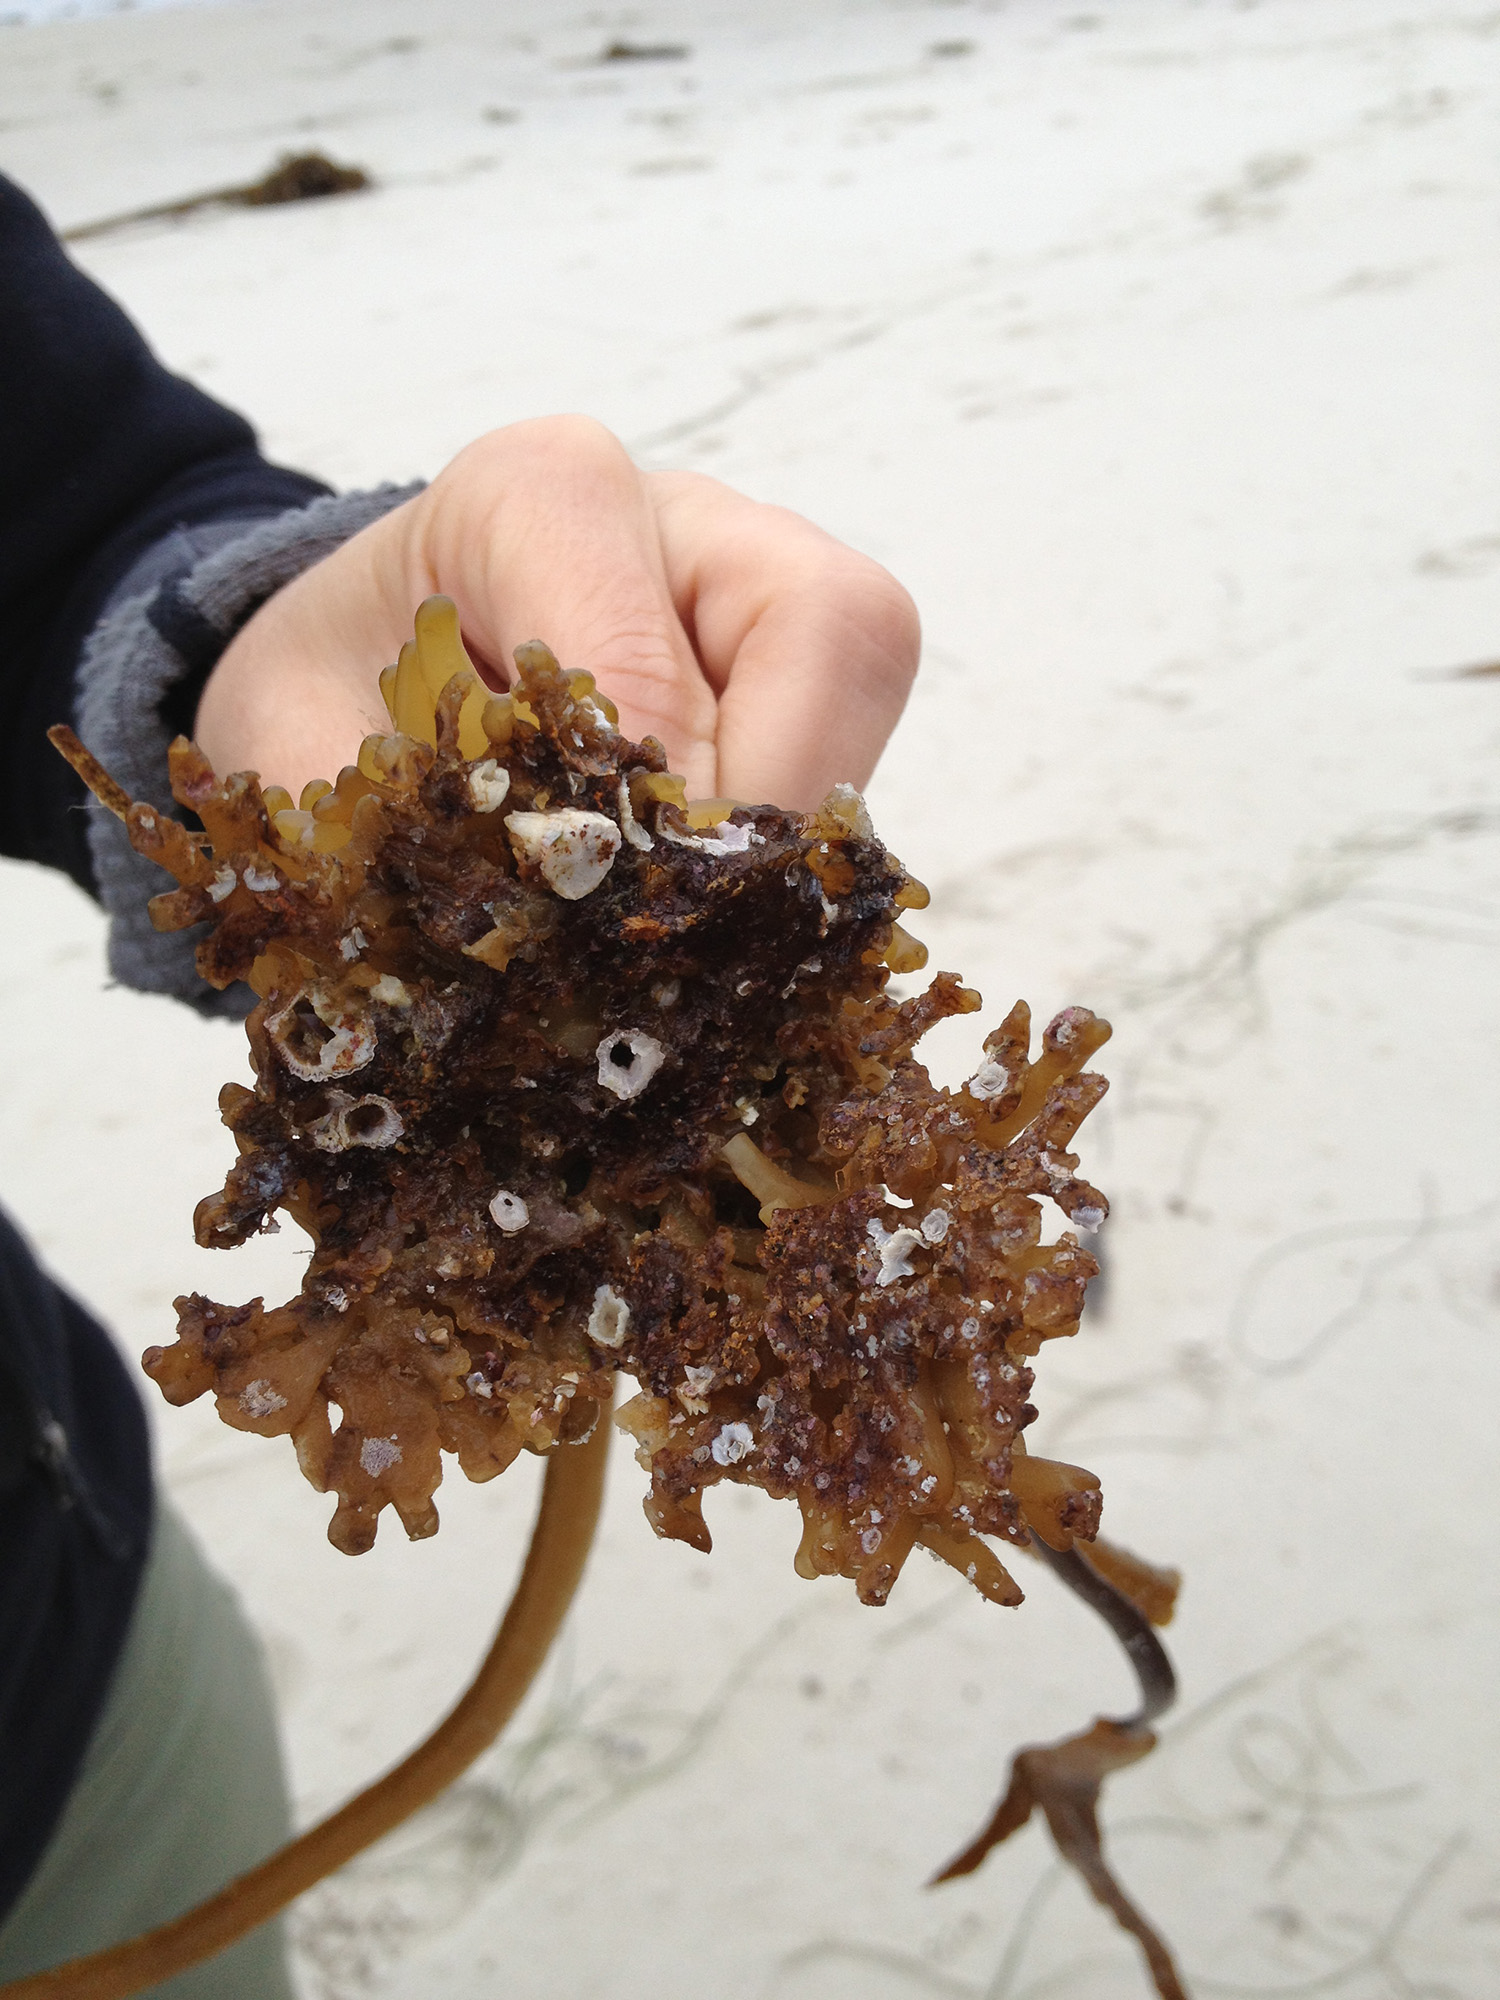 "Pacific kelp forests are far older than we thought"